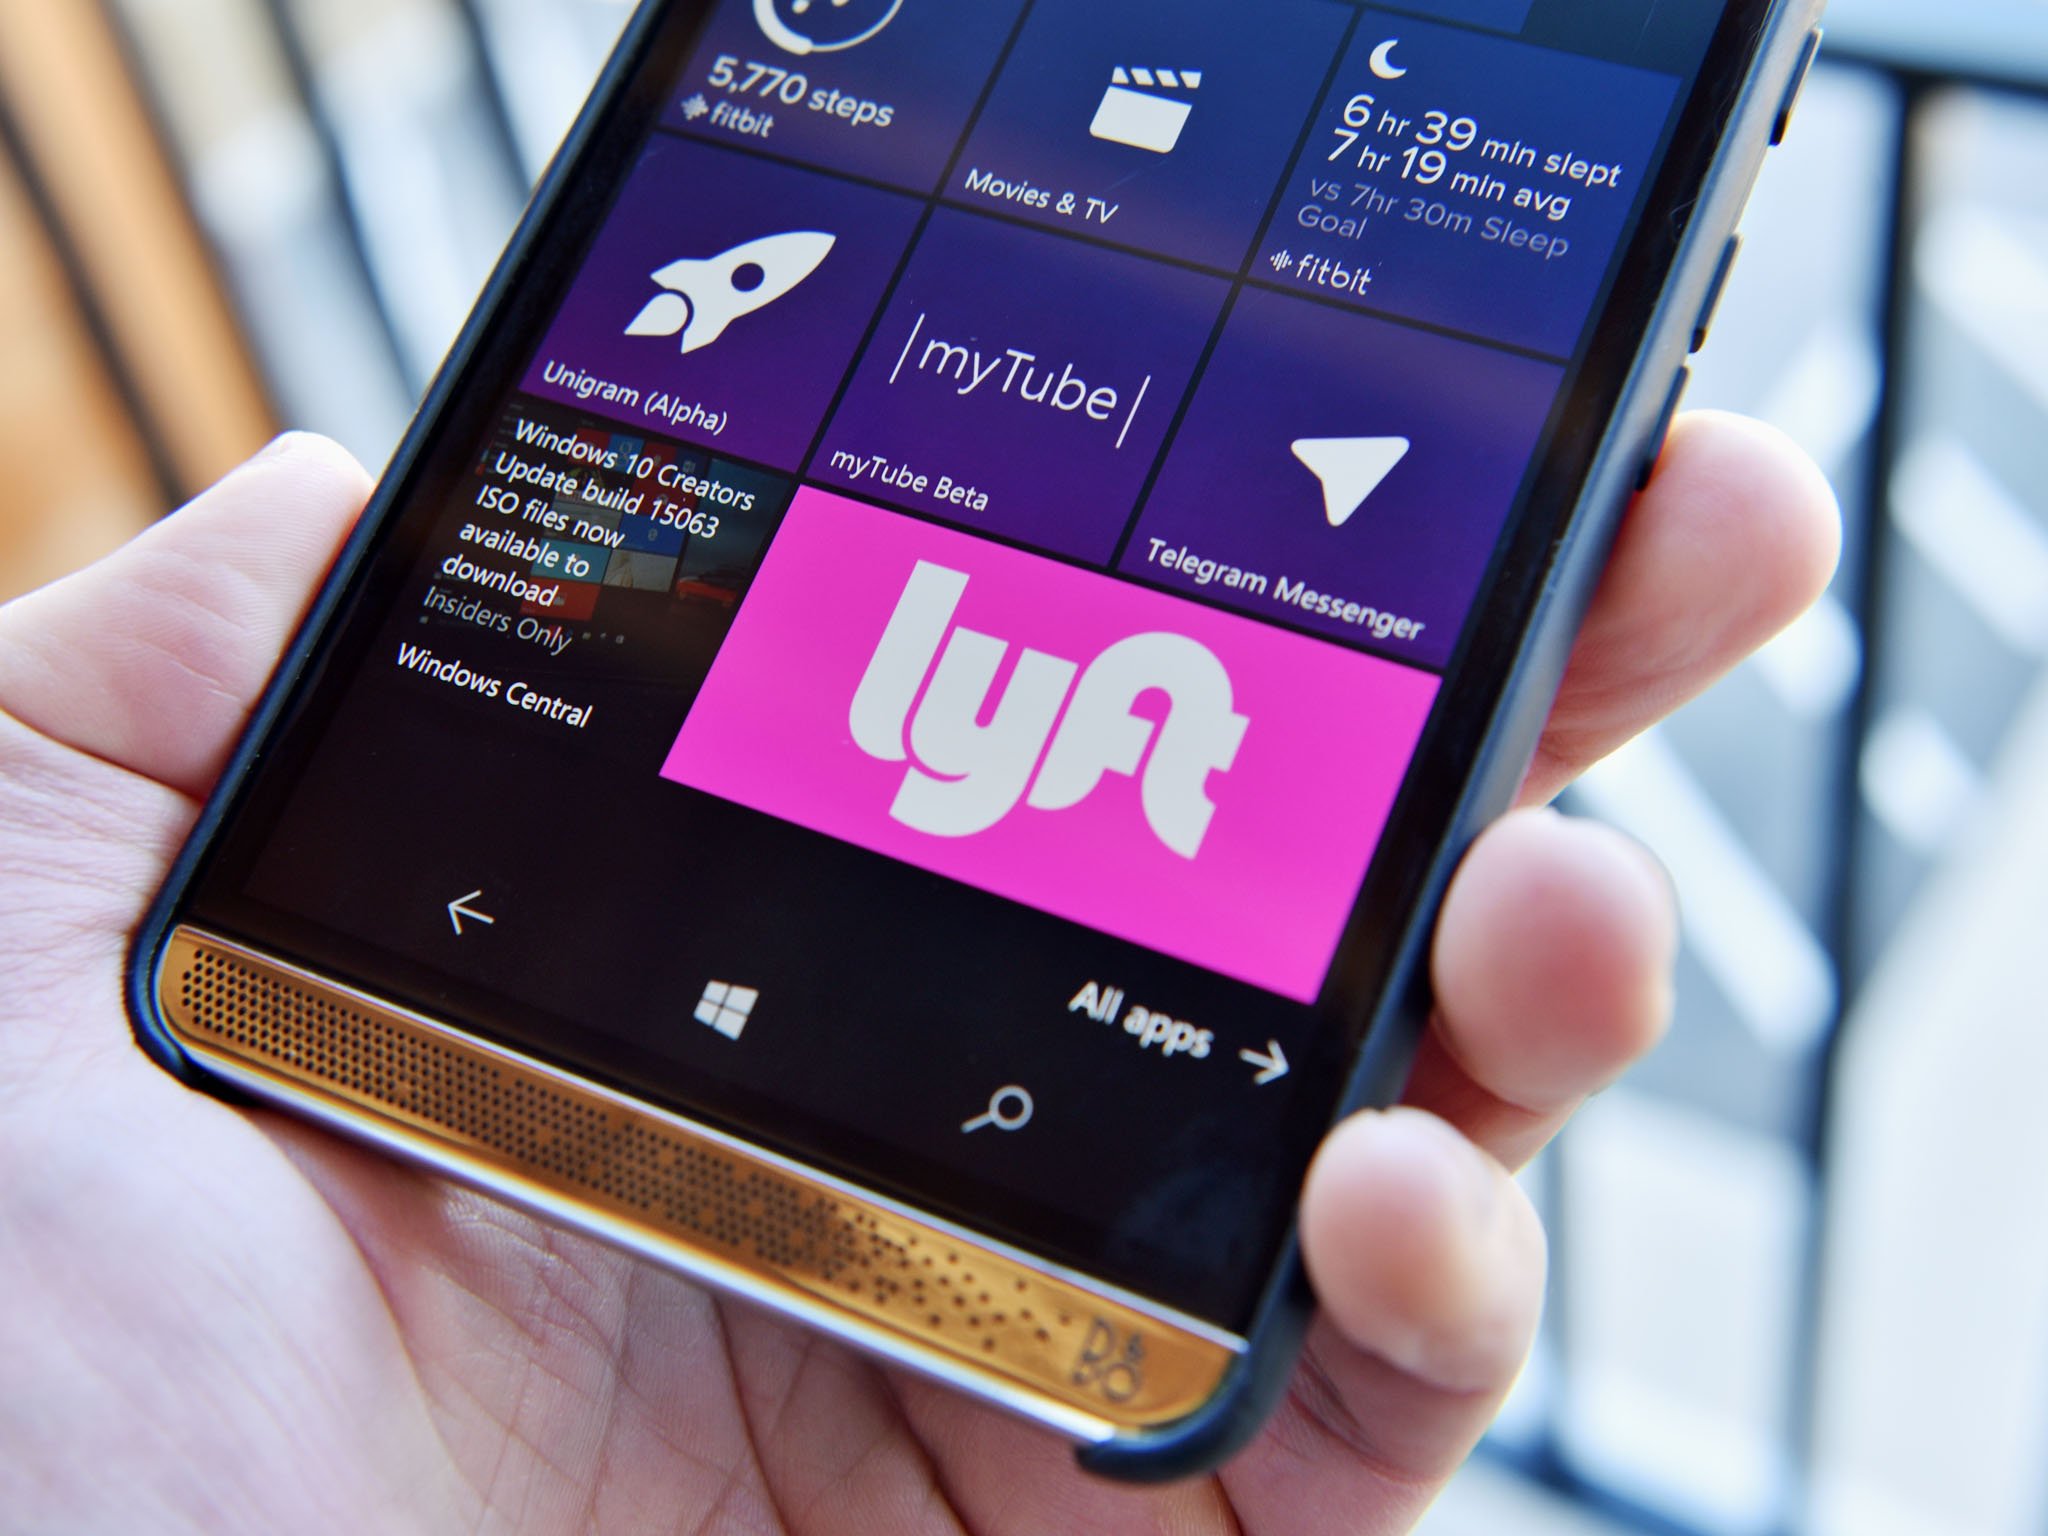 Lyft finally makes its way to Windows 10 PC and Mobile | Windows Central1200 x 900